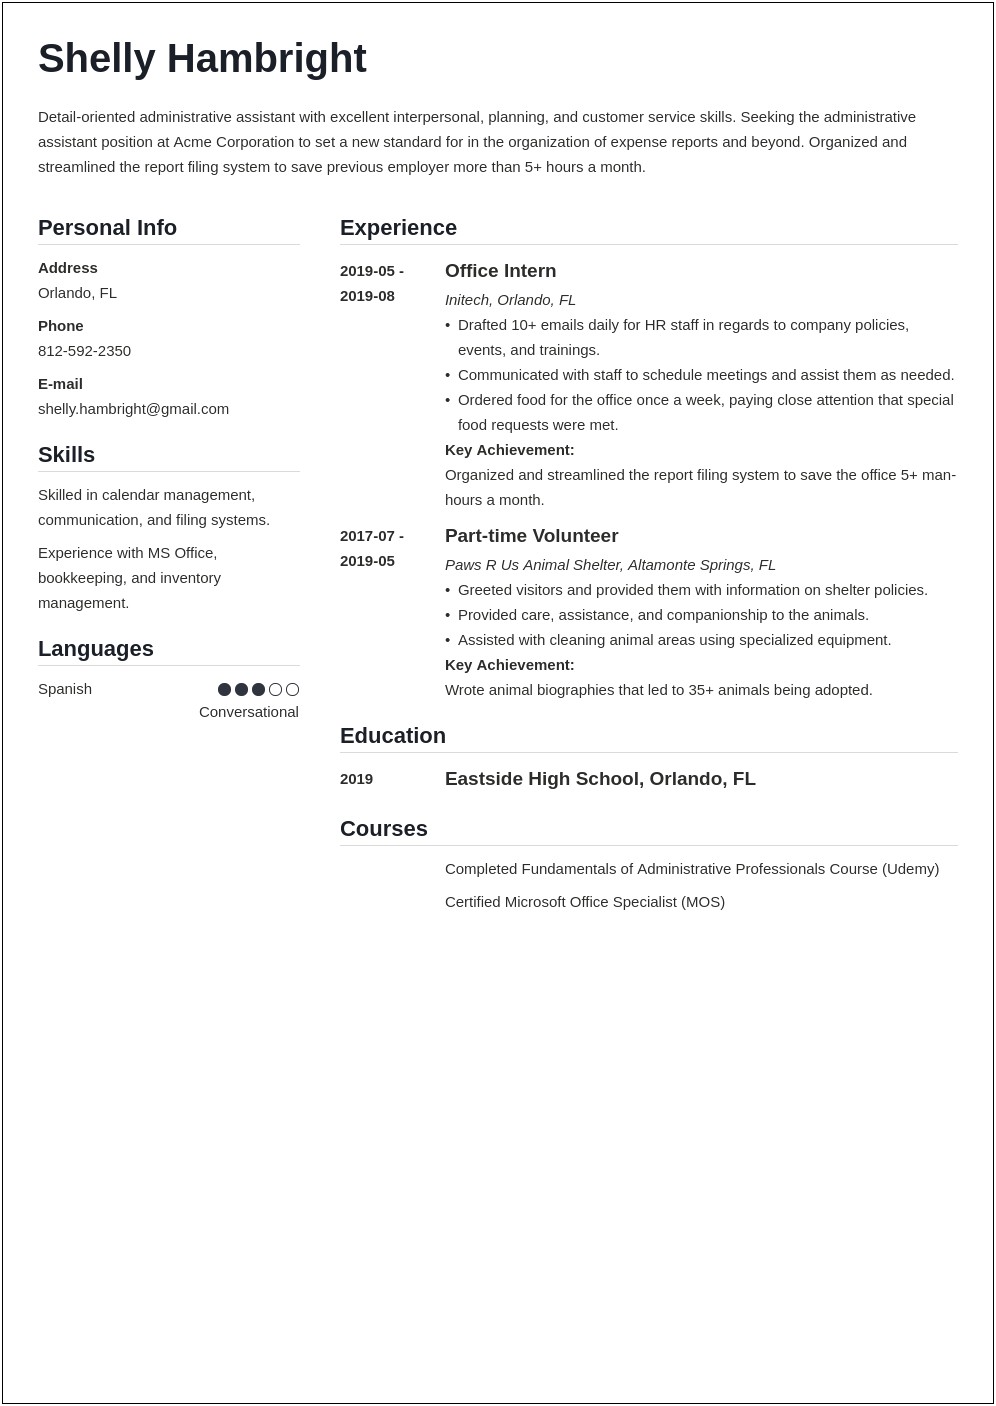 Sample Resumes For Administrative Assistant Positions In Education